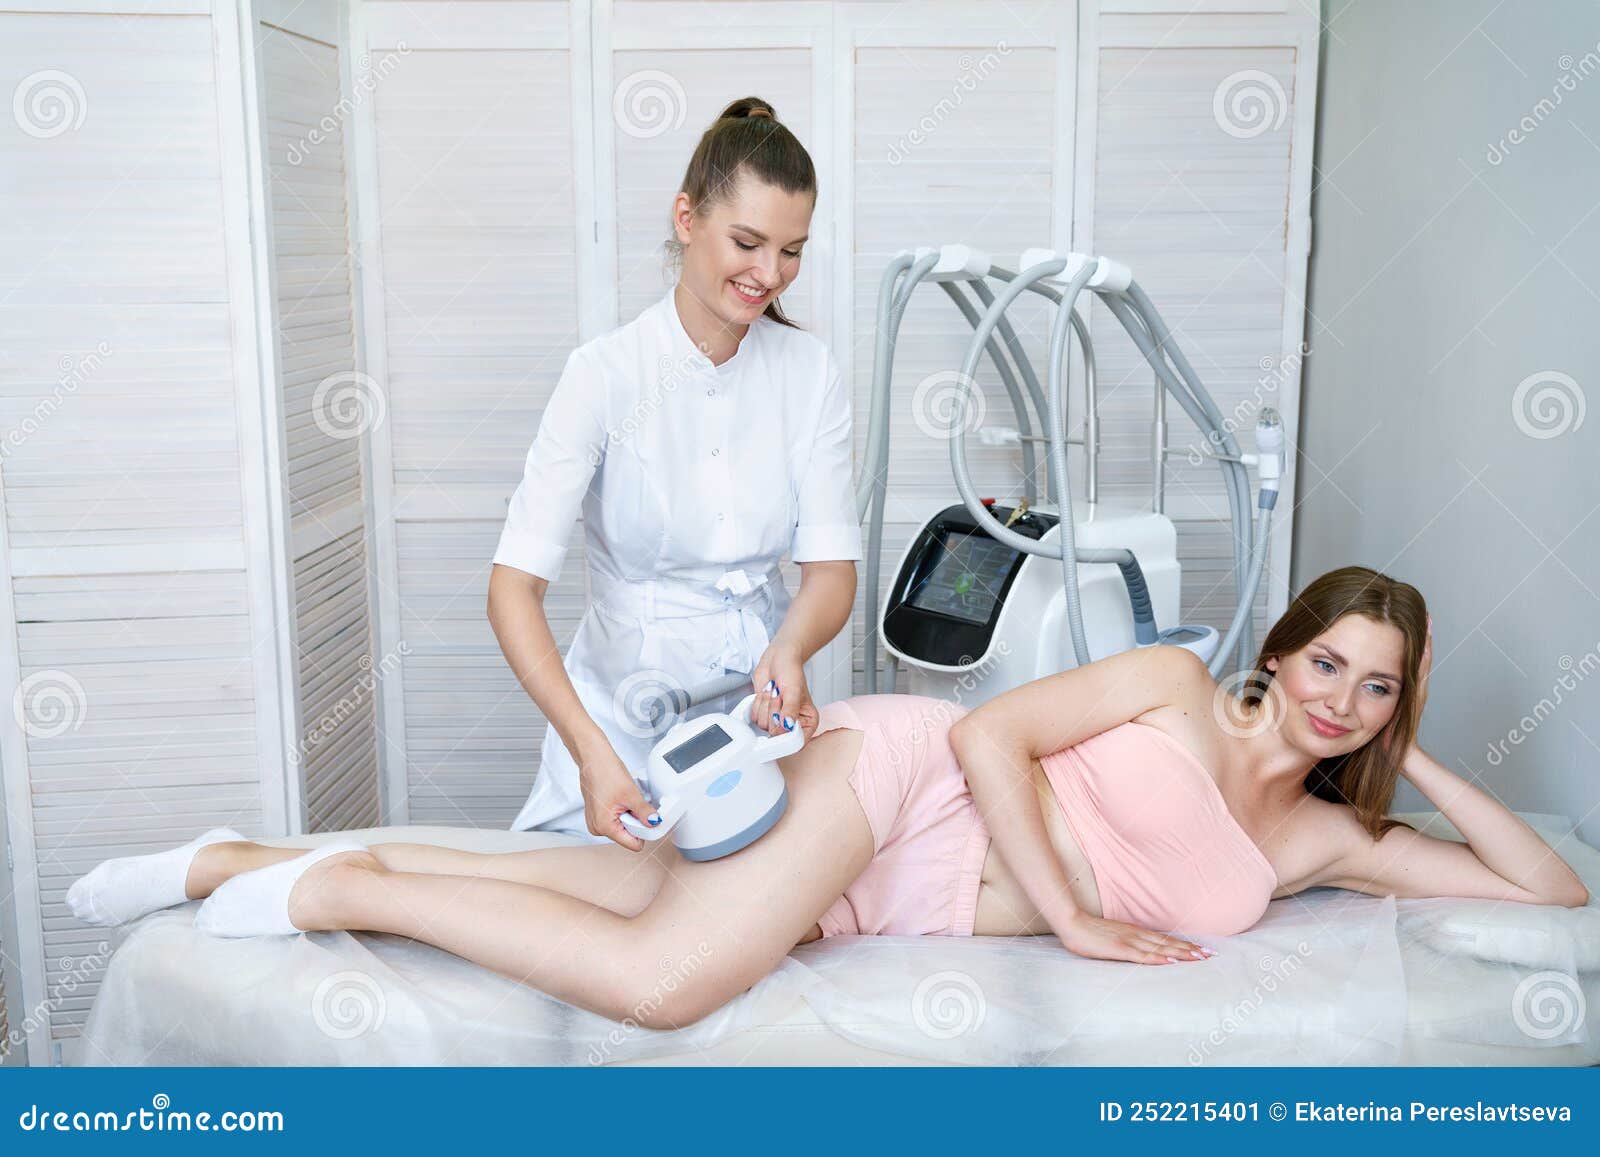 Woman Receiving Treatment for Cellulite. Slimming Vacuum Massage Machine  Stock Image - Image of beauty, cavitation: 252215401